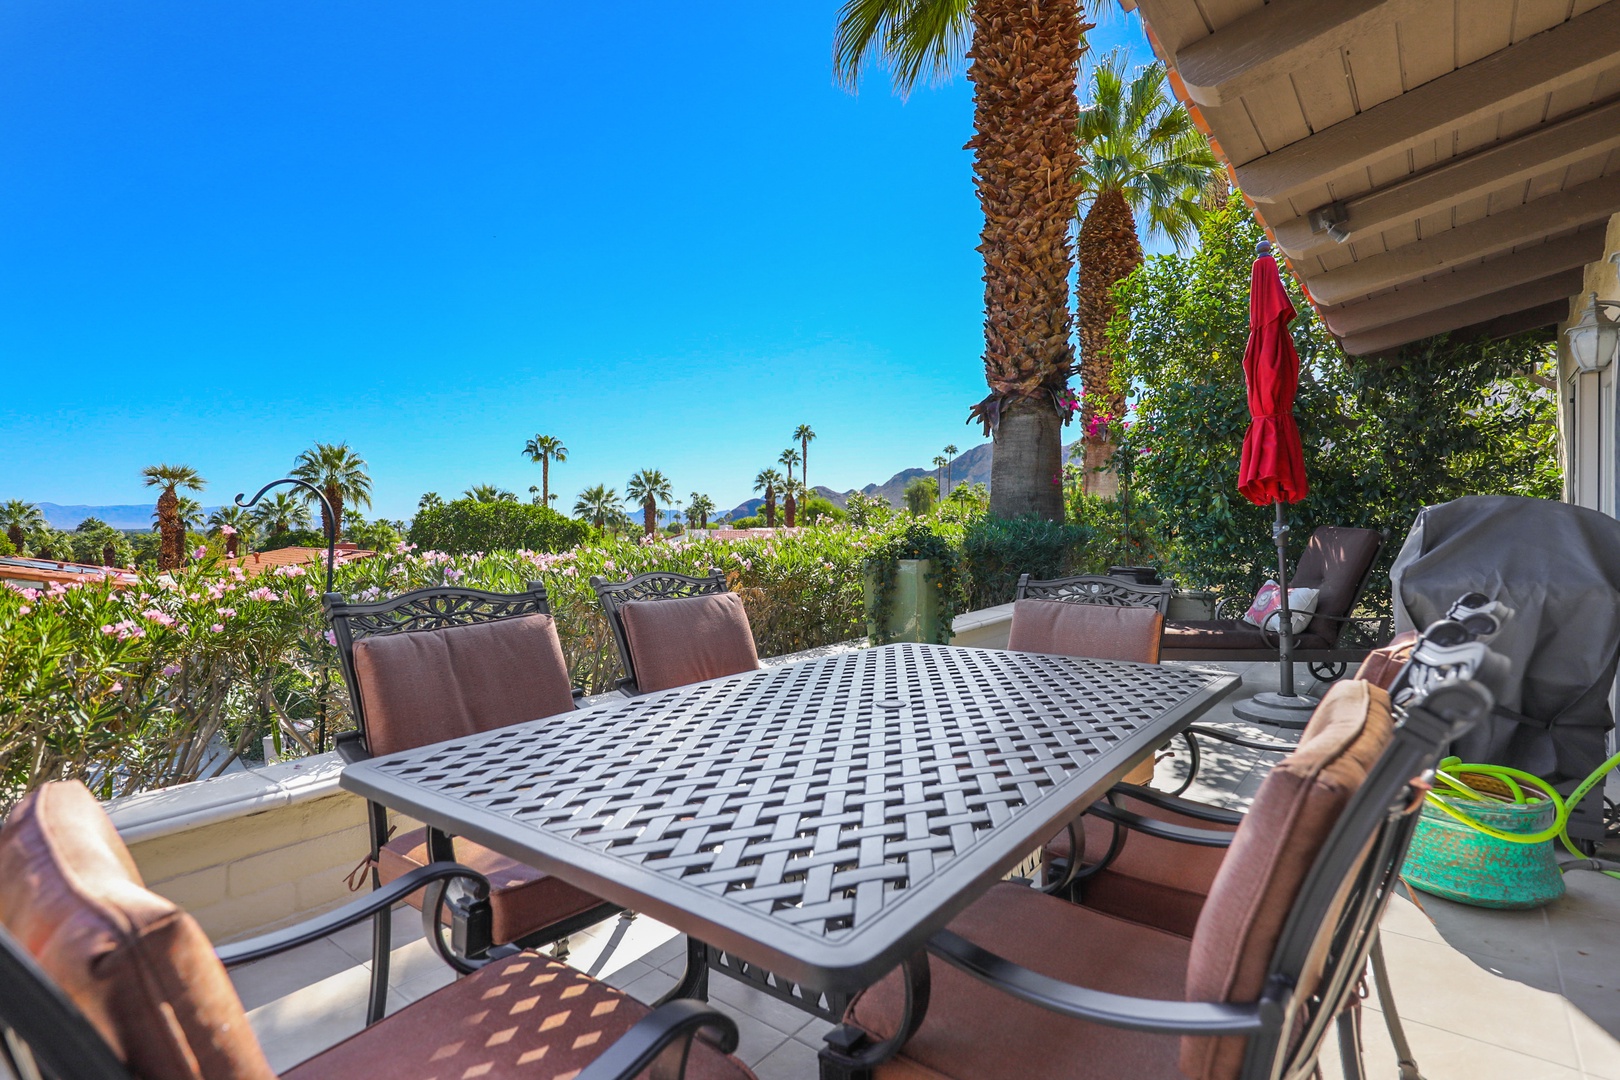 Back Patio with Views Overlooking Rancho Mirage